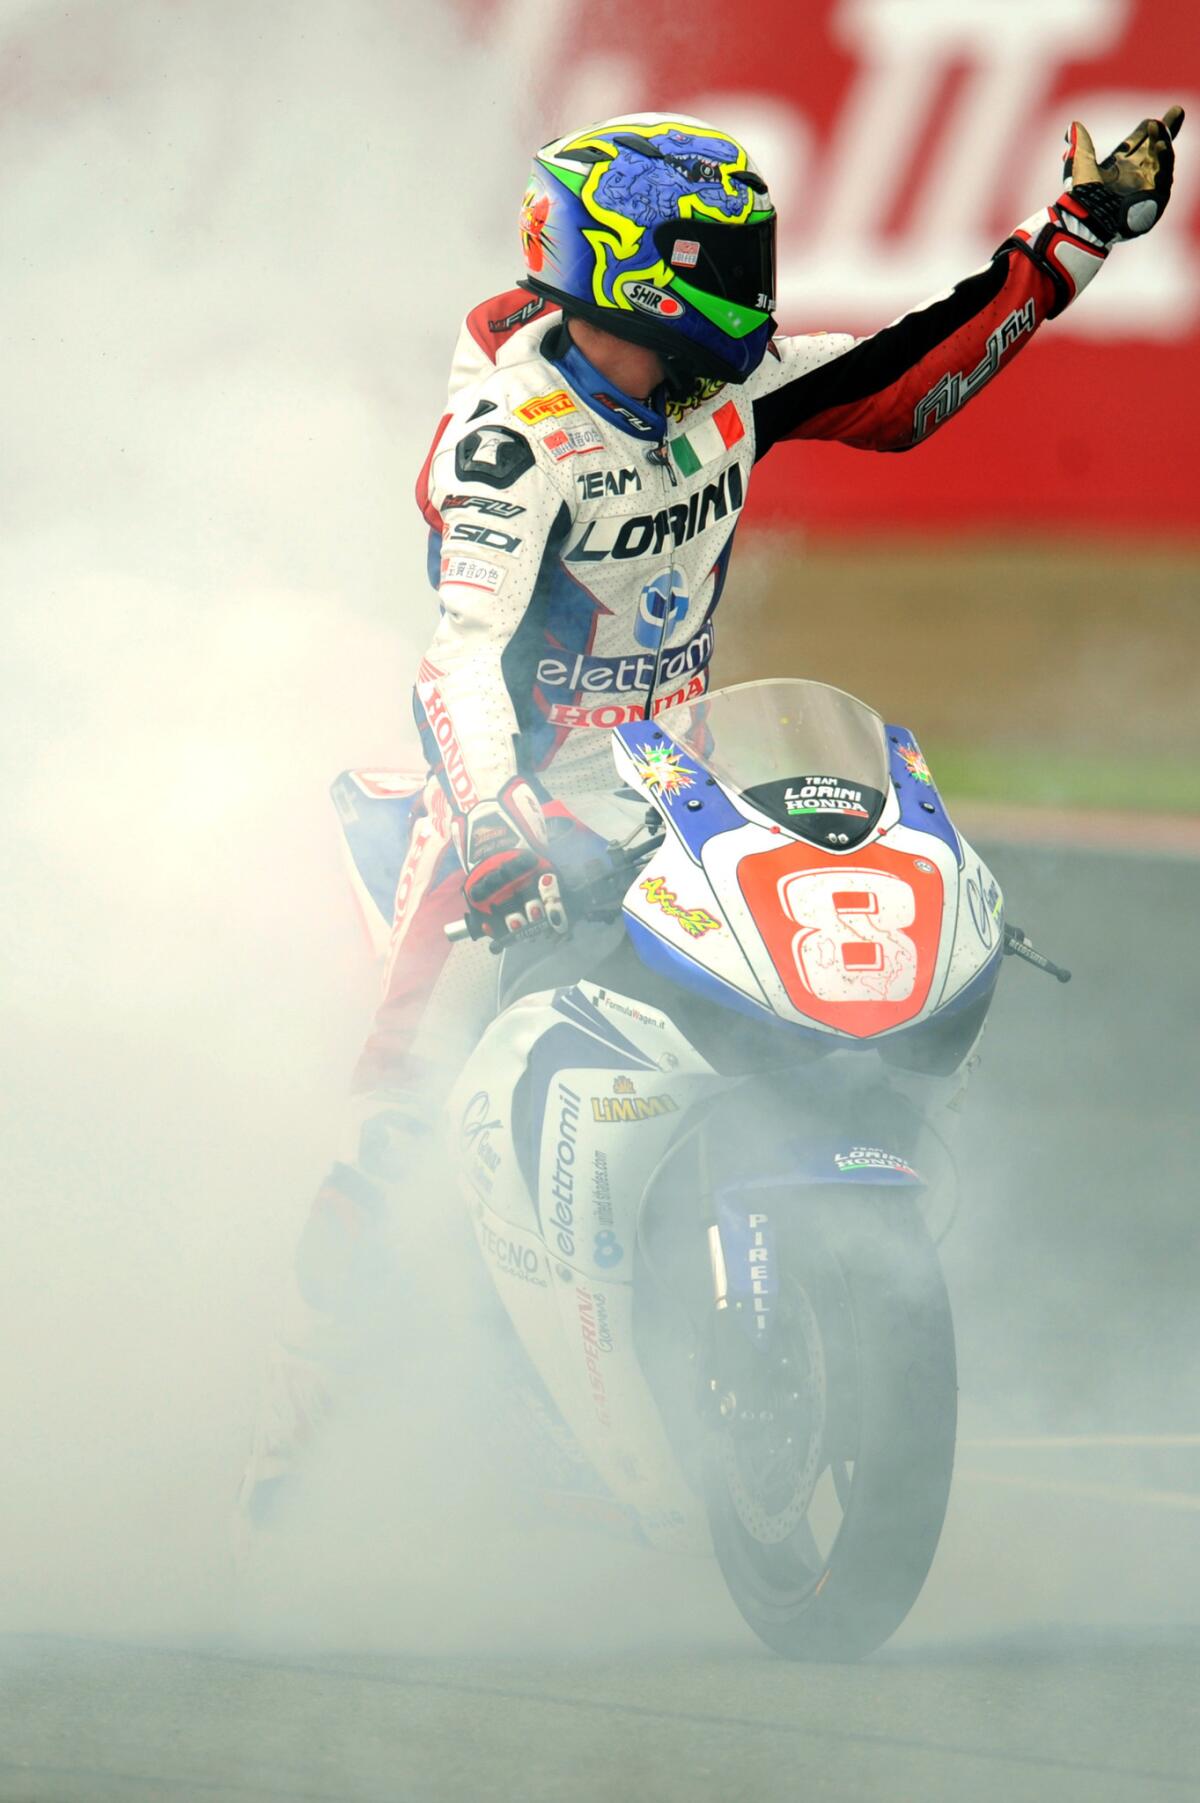 Andrea Antonelli of Italy gestures to the crowd after finishing in third position in the Superstock 1000 FIM Cup race at the Silverstone circuit on August 1, 2010.